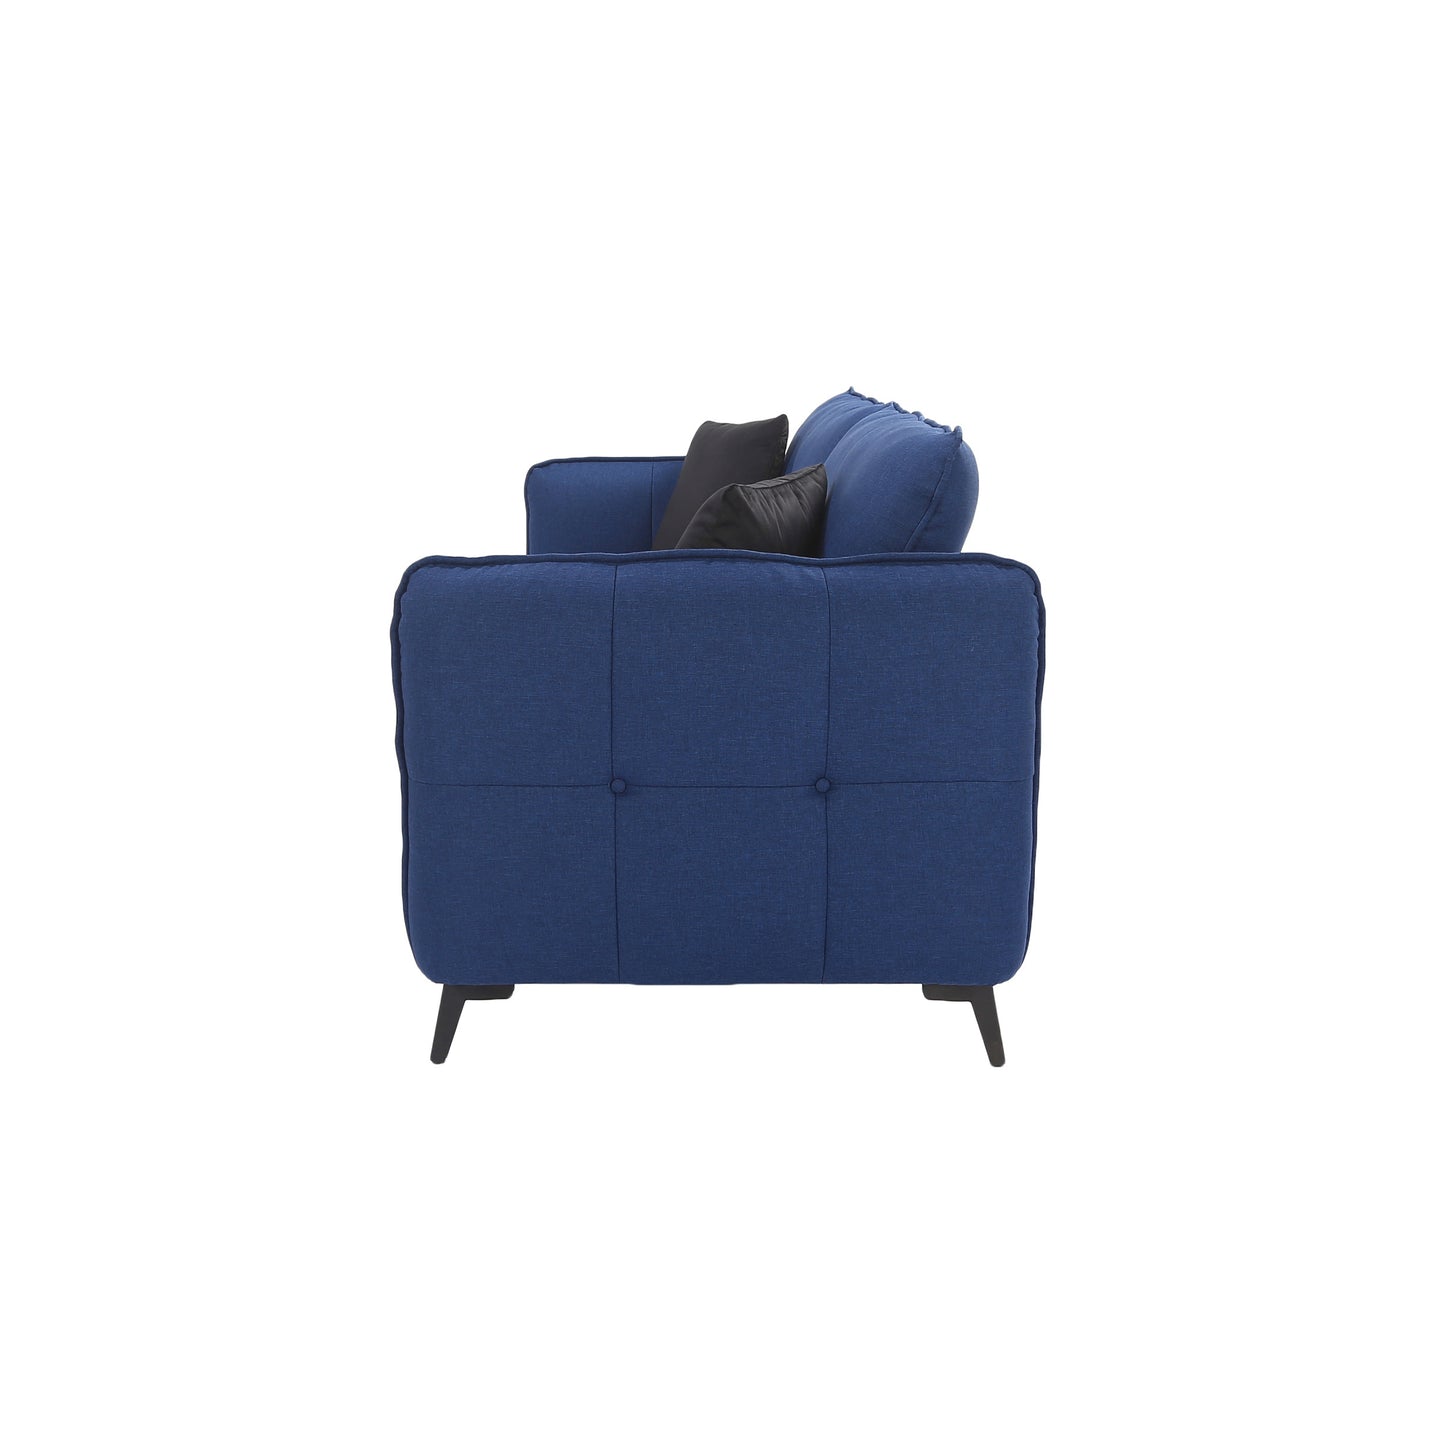 3-seater simple style  sofa